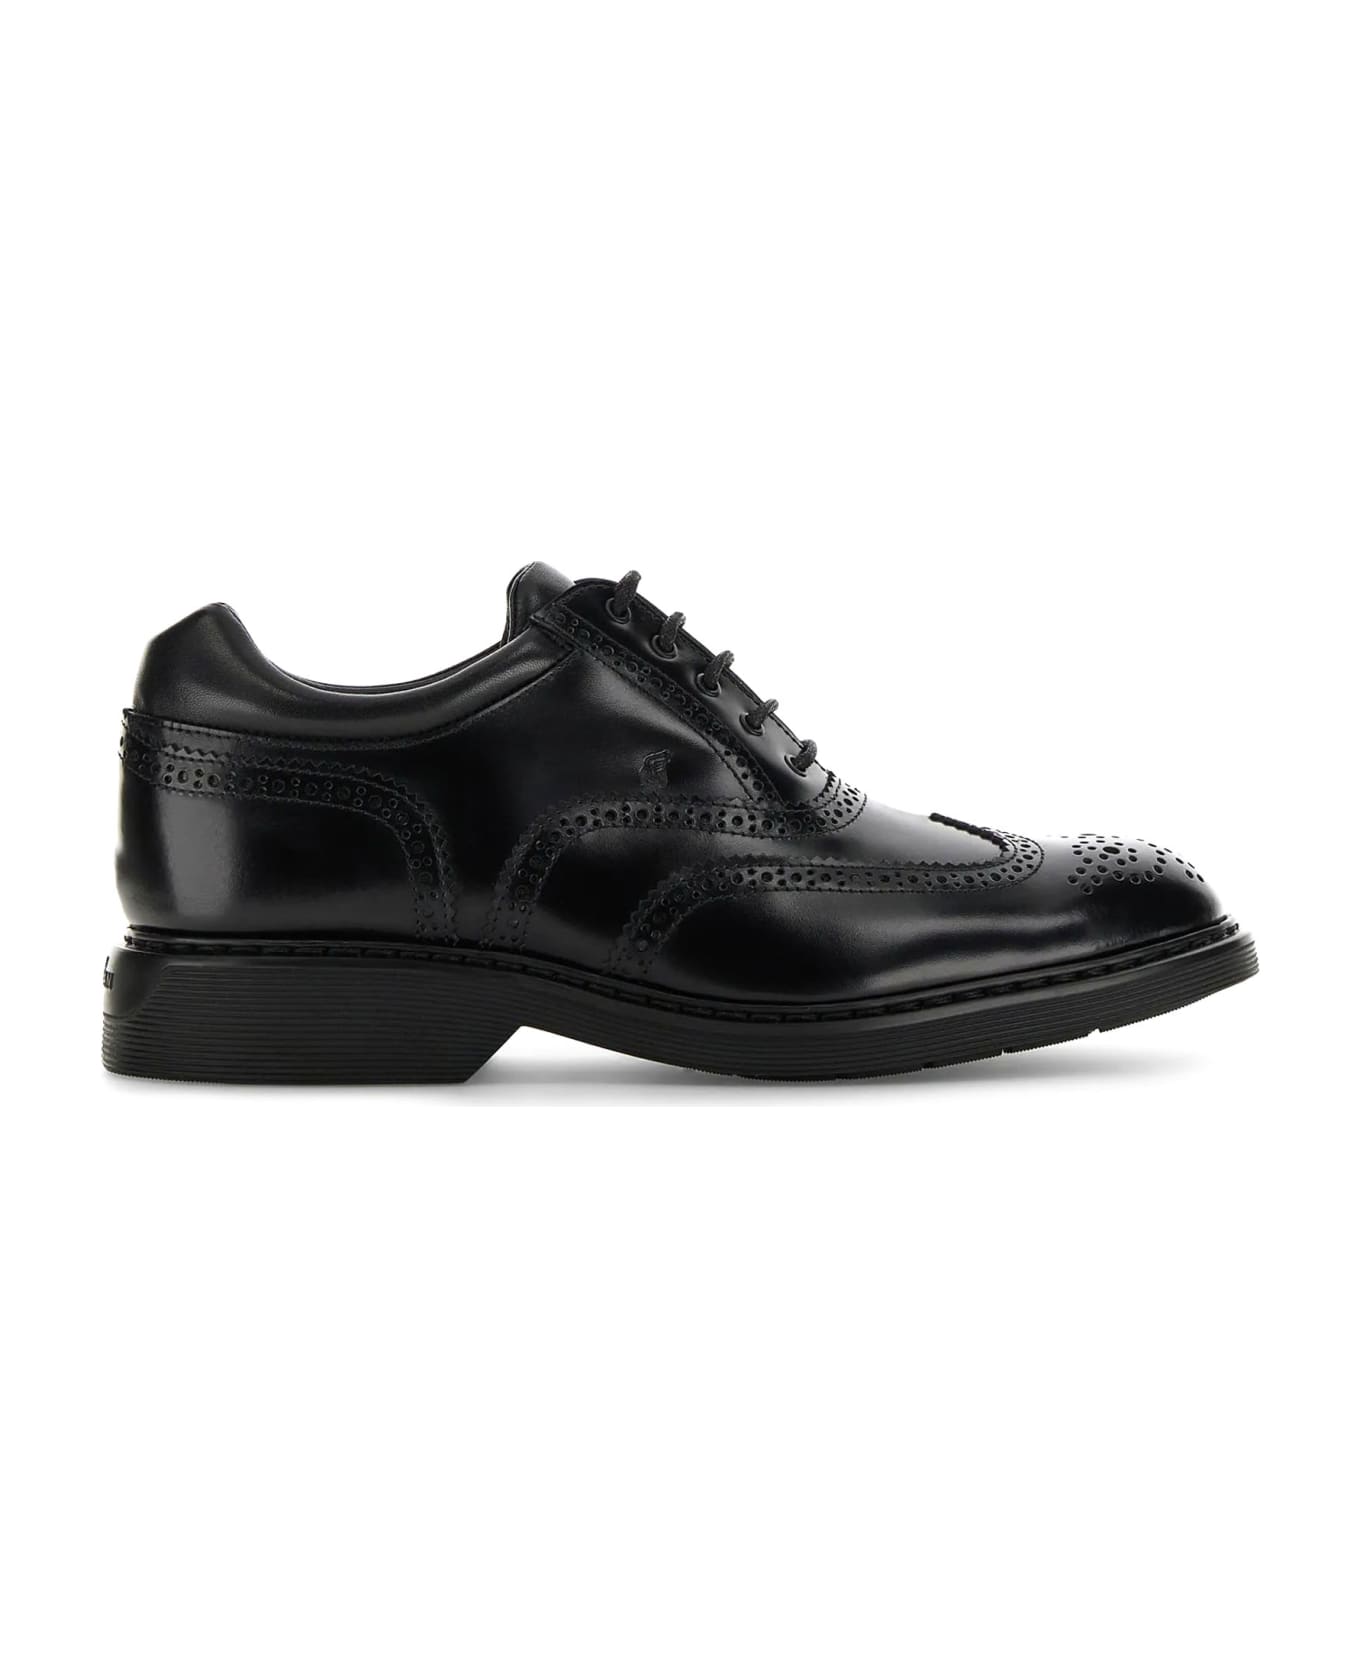 Hogan H576 Leather Lace-up Shoes - black ローファー＆デッキシューズ